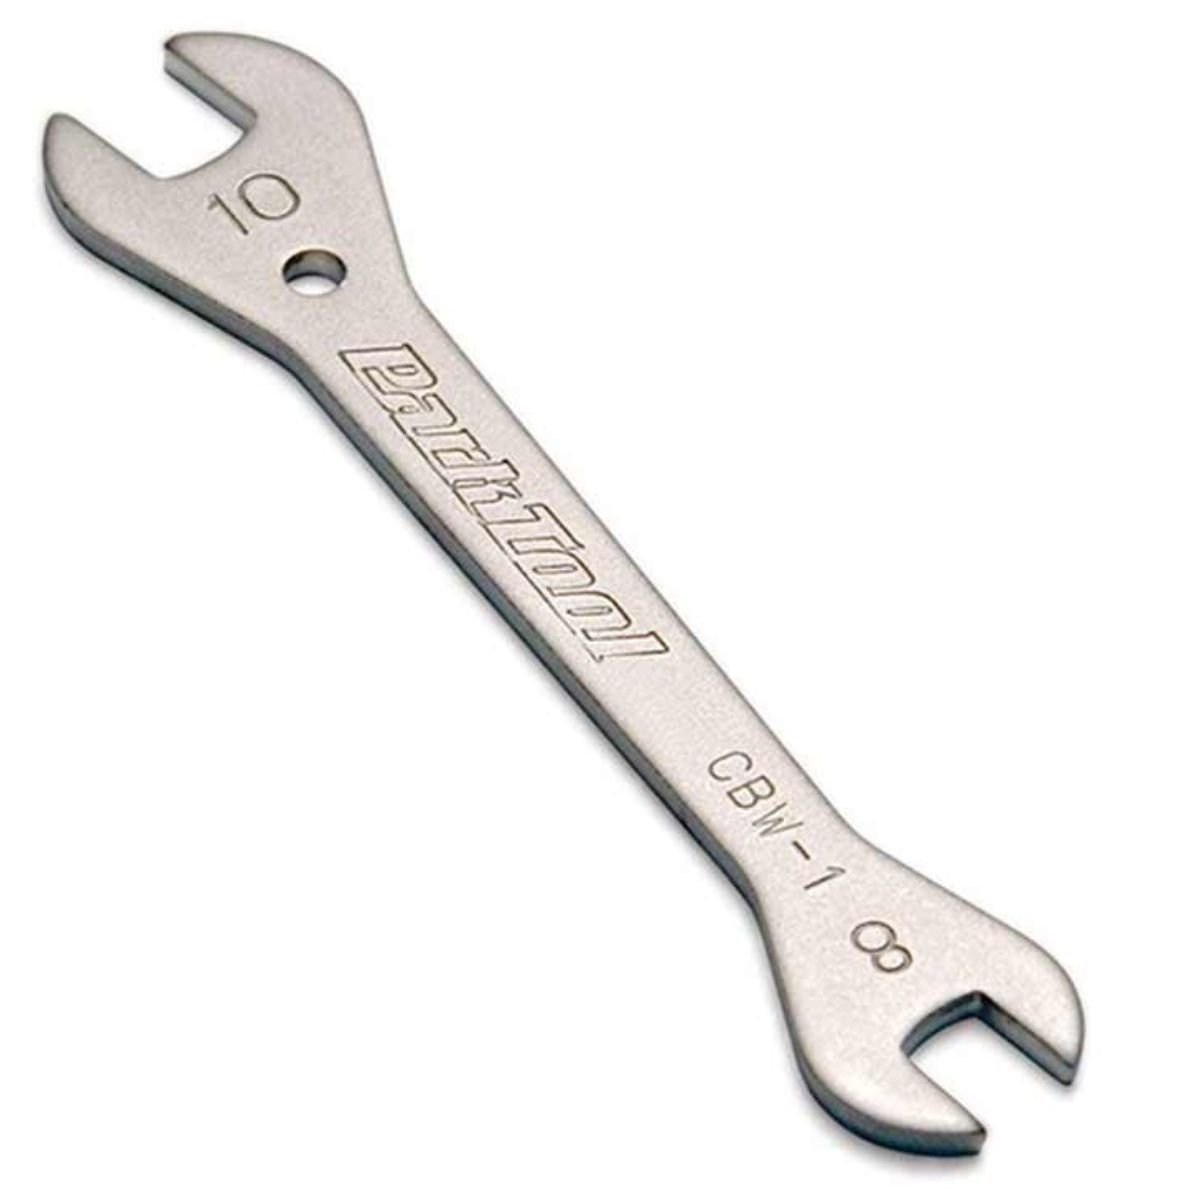 Park tool cbw-1 thin wrench 3.2mm thick, 8 et 10mm